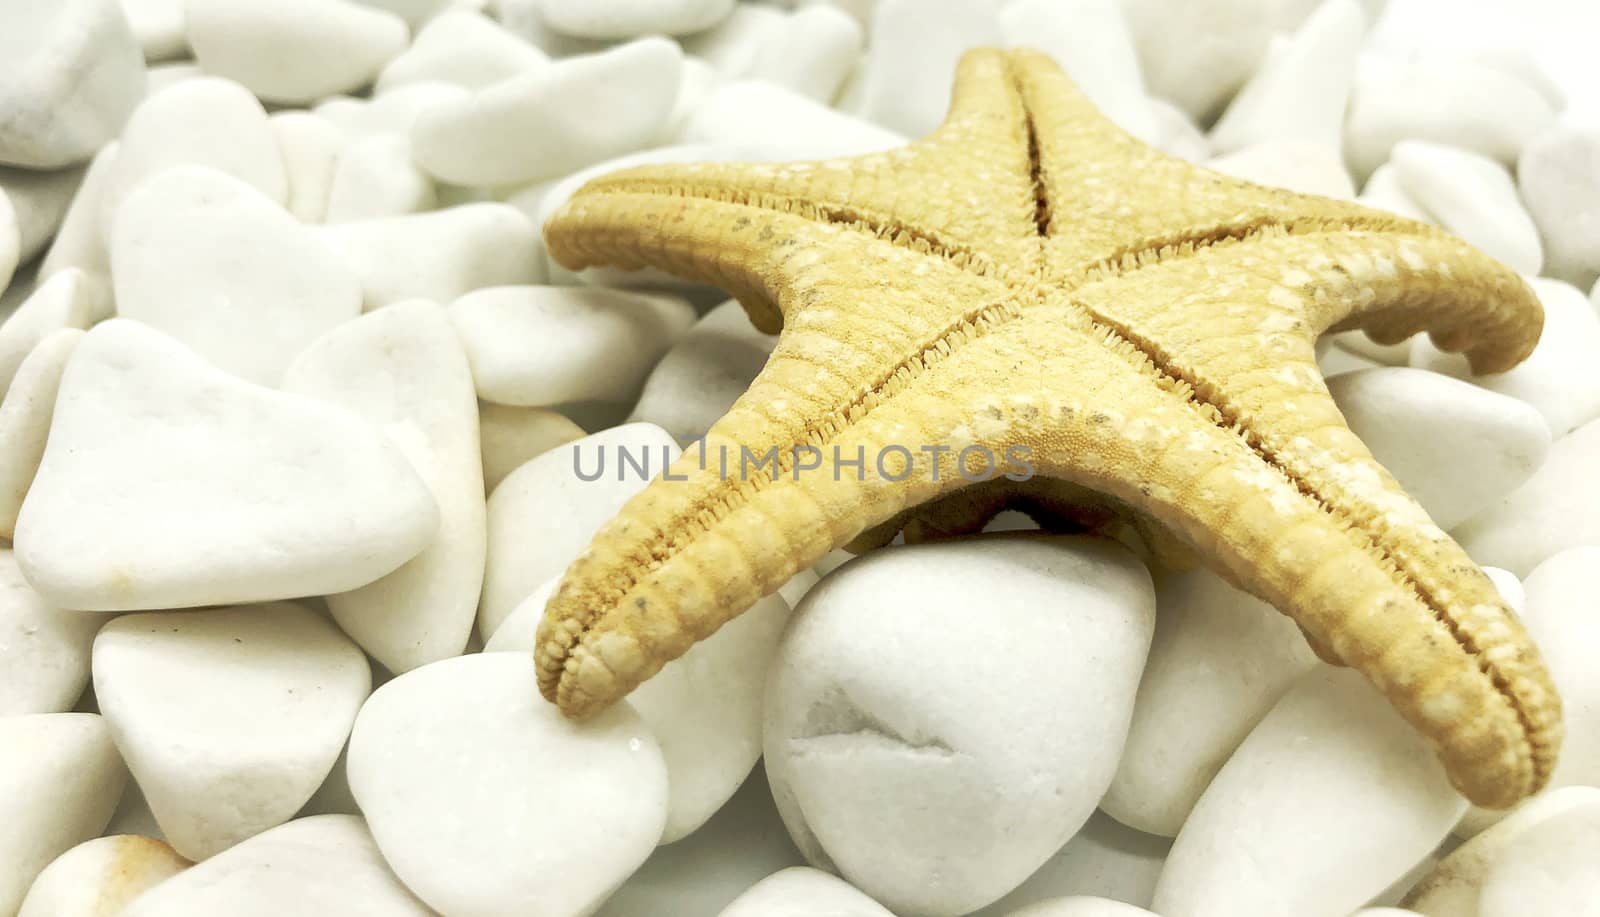 huge ocean sea shellfish closeup white on stones perspective isolated spa relax season vacation by F1b0nacci